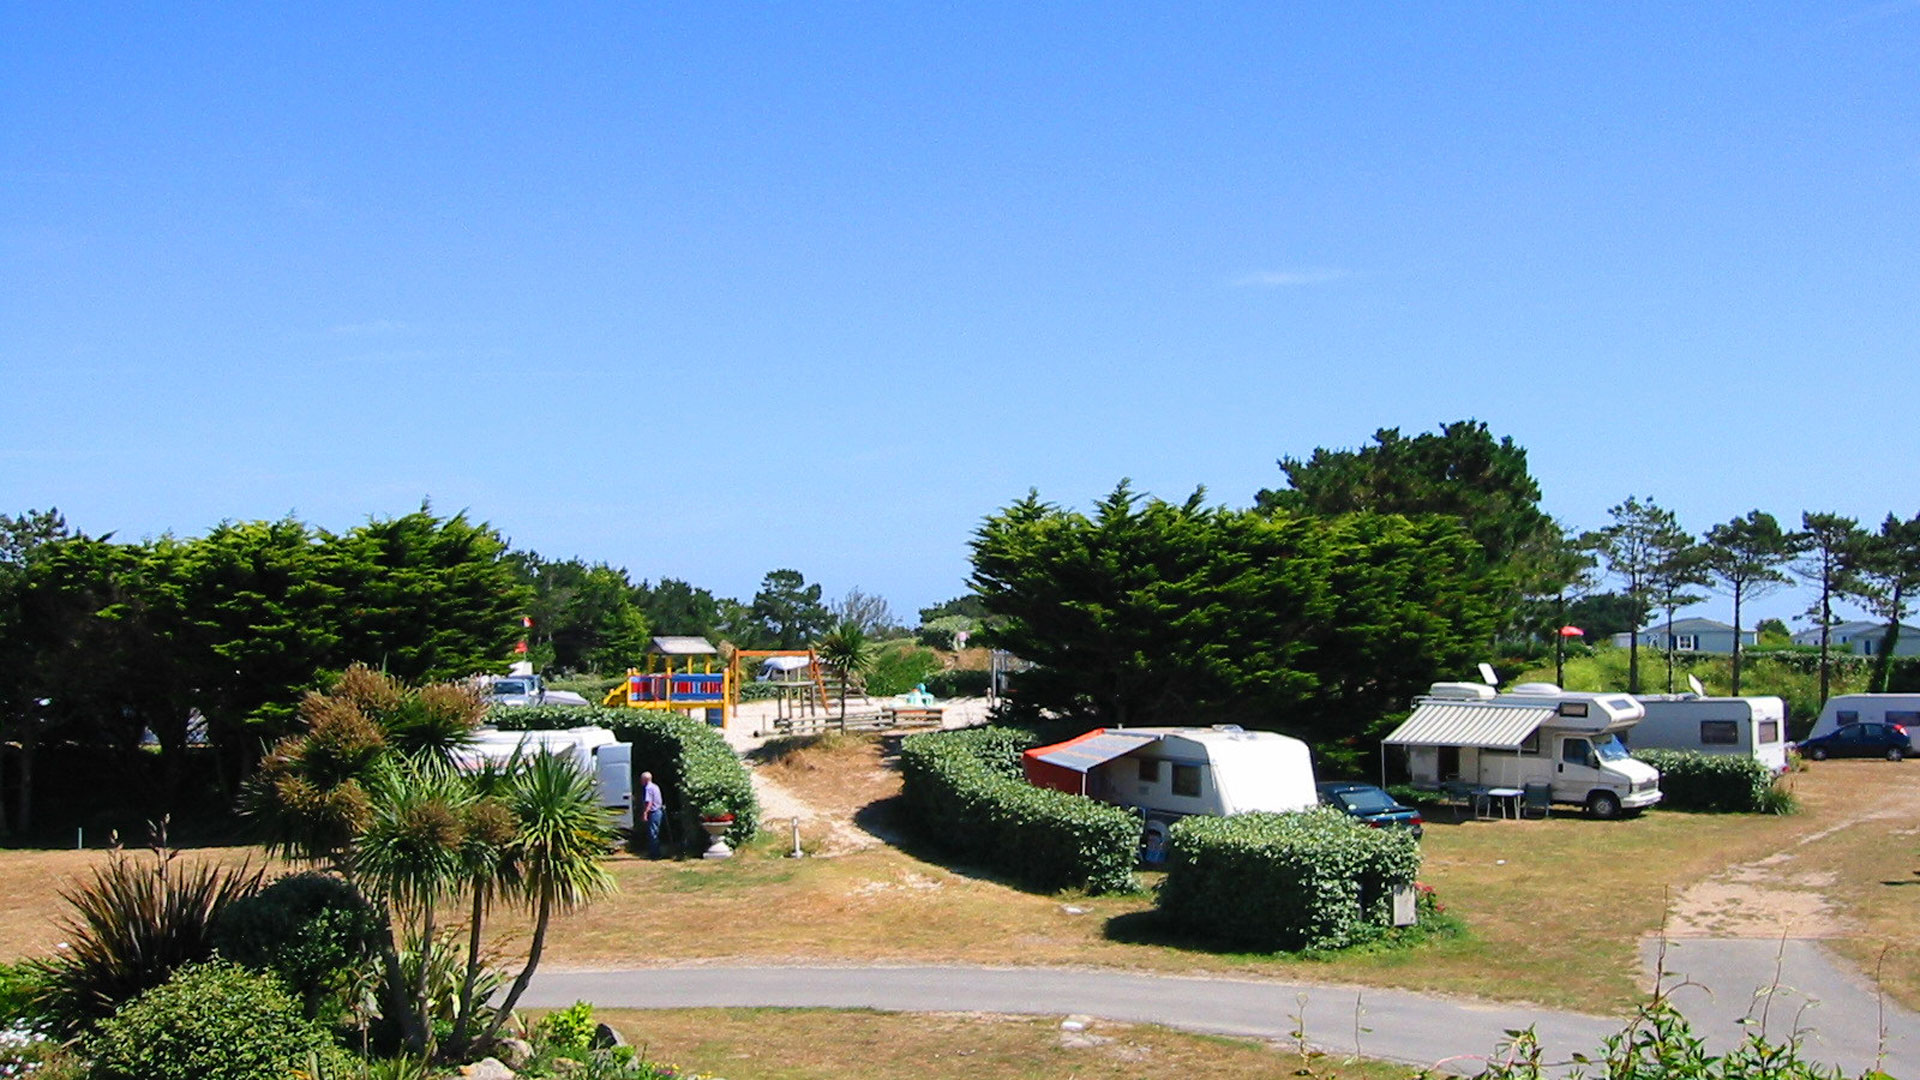 Les Abers - The Camping and Caravanning Club